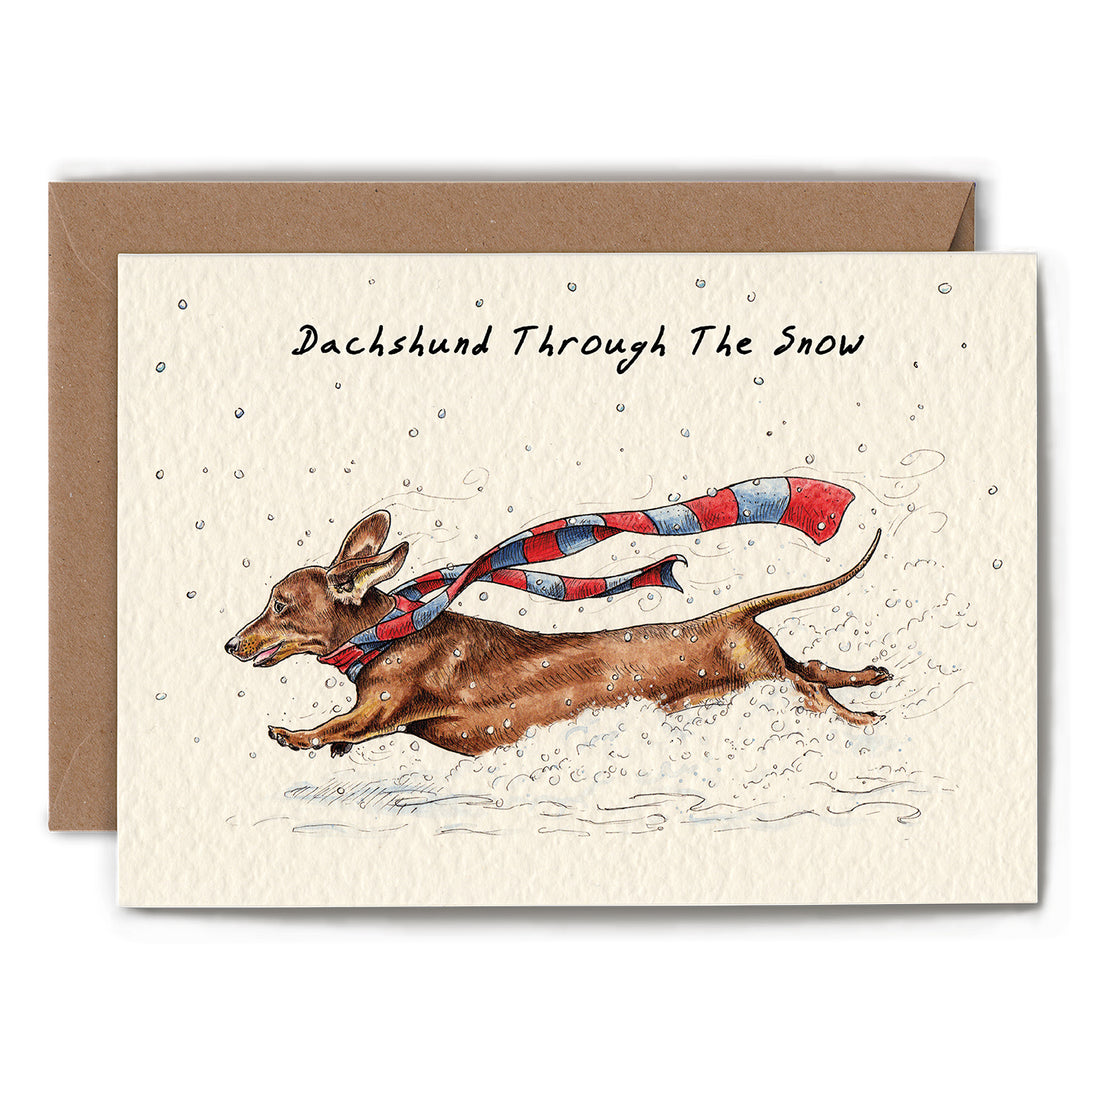 A Dachshund Through the Snow Card, illustrated on a blank greeting card by Hester &amp; Cook stationery.